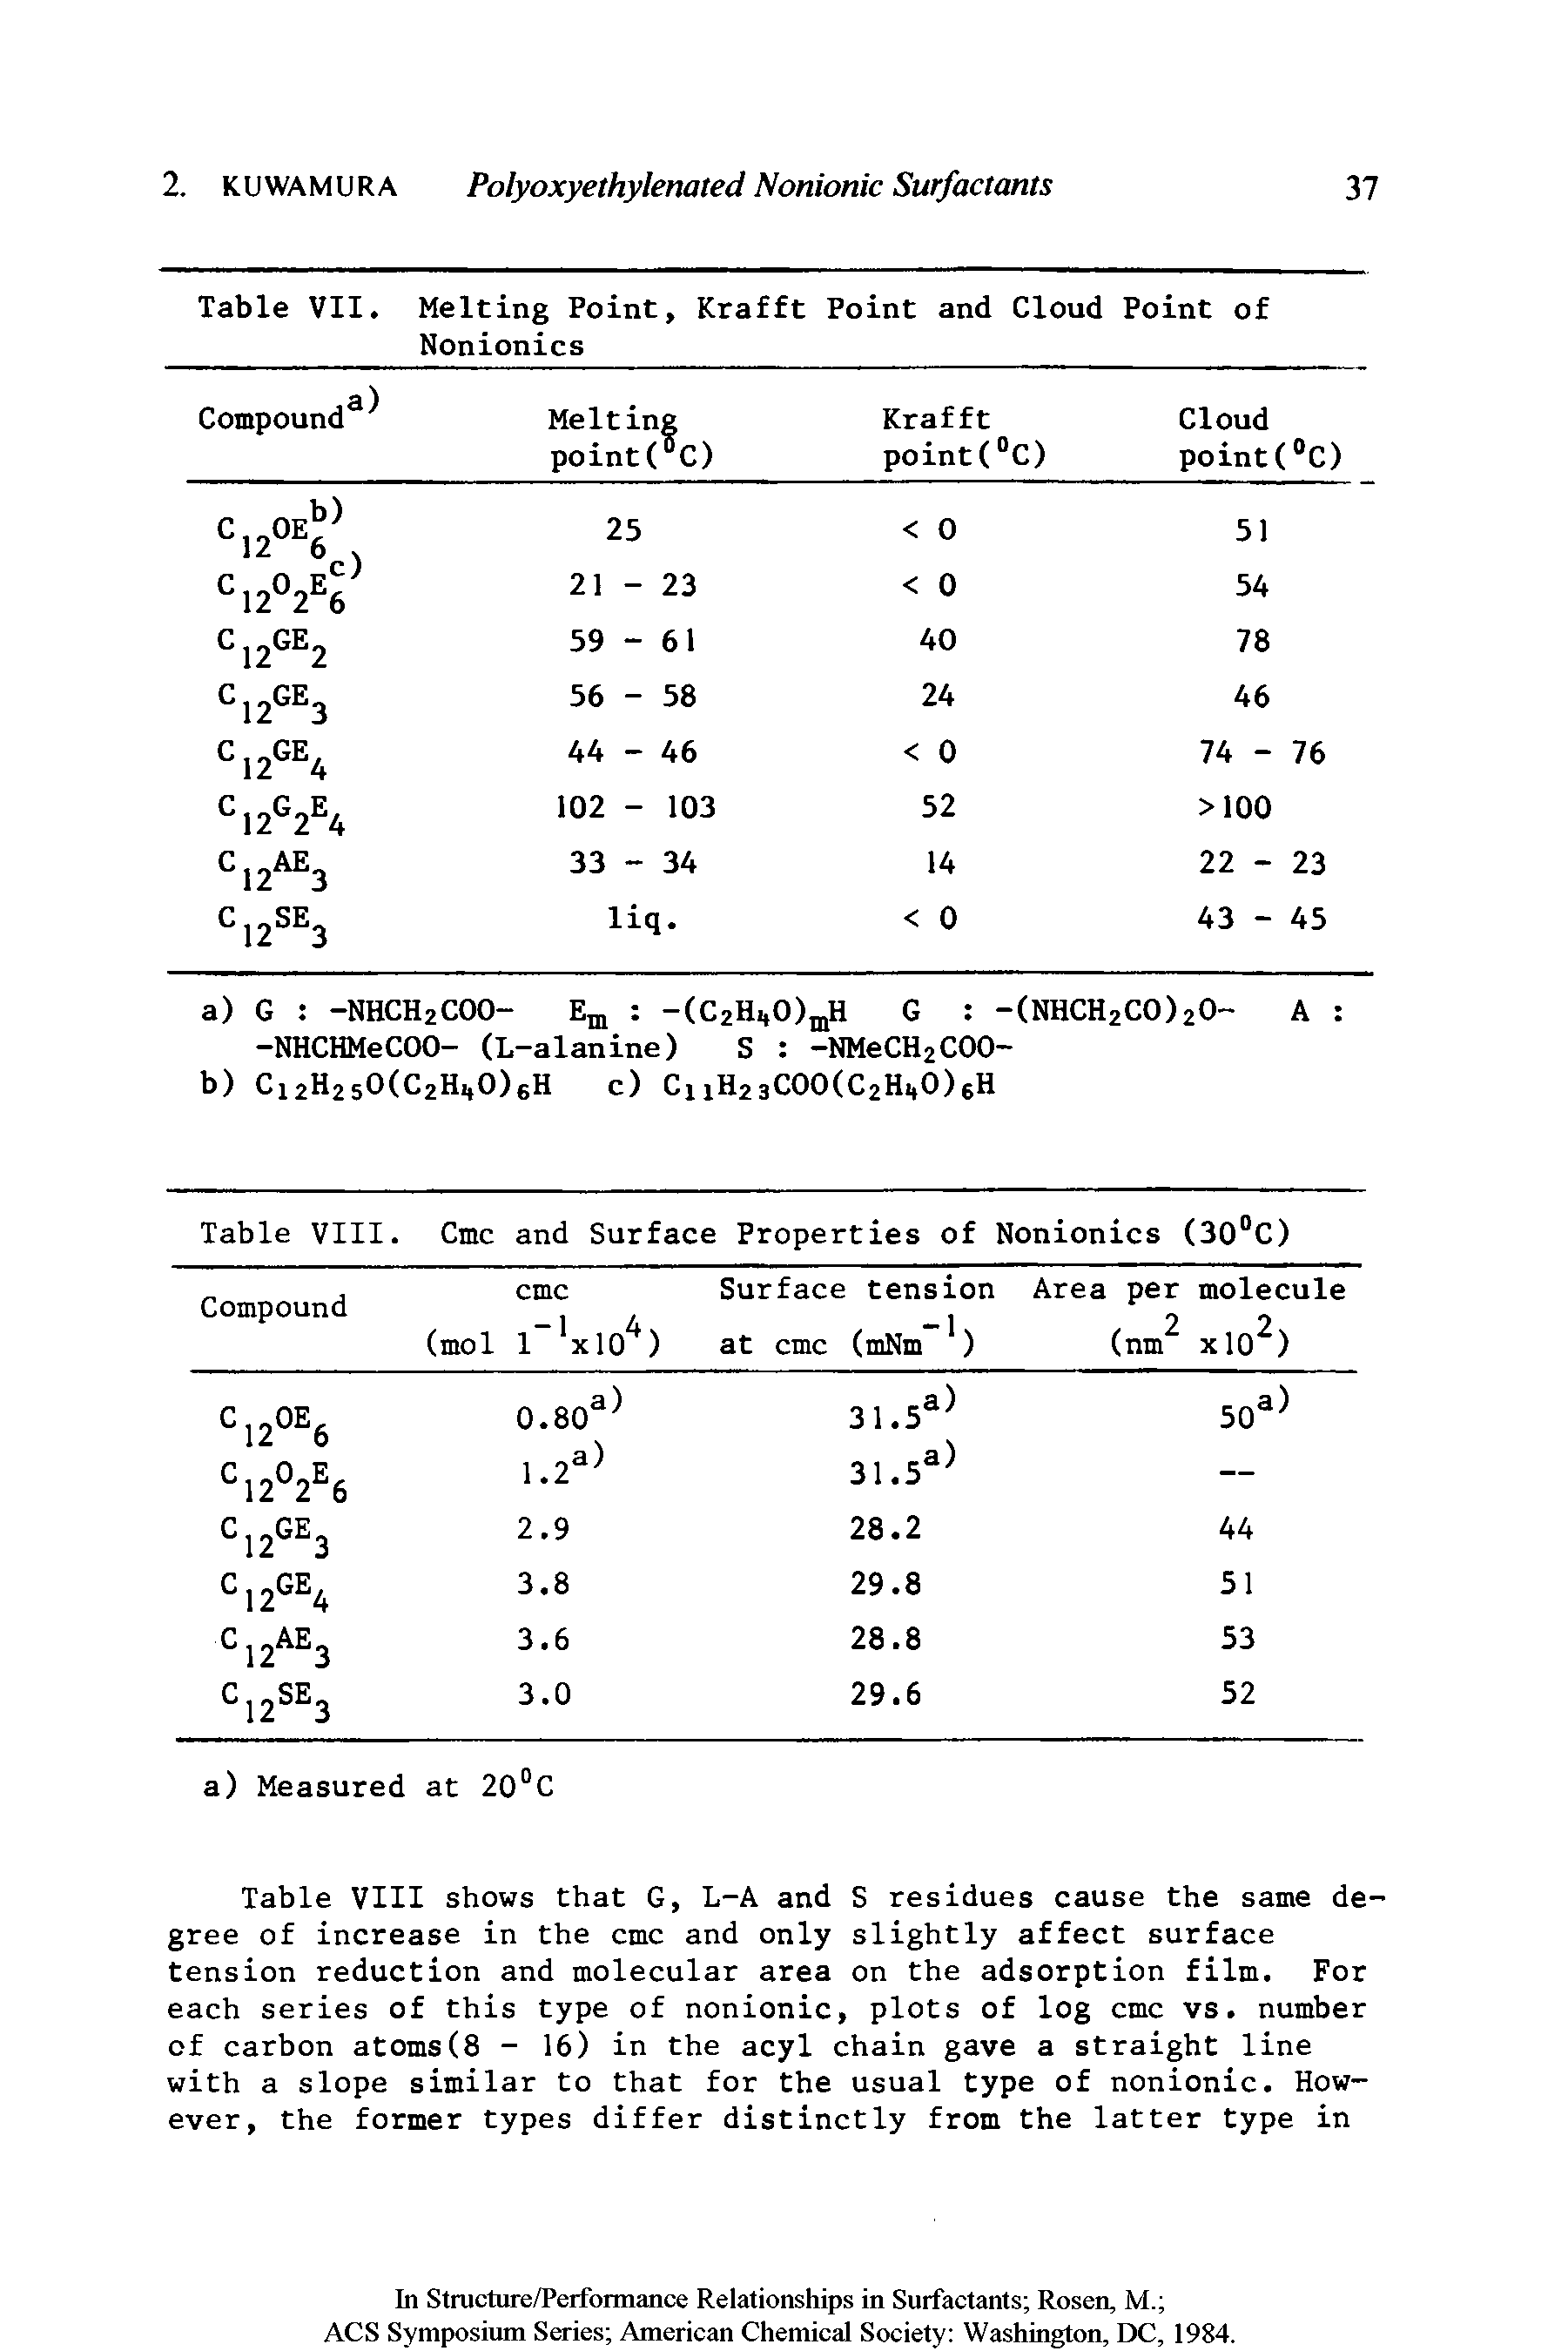 Table VIII shows that G, L-A and S residues cause the same degree of increase in the cmc and only slightly affect surface tension reduction and molecular area on the adsorption film. For each series of this type of nonionic, plots of log cmc vs. number of carbon atoms(8 - 16) in the acyl chain gave a straight line with a slope similar to that for the usual type of nonionic. However, the former types differ distinctly from the latter type in...